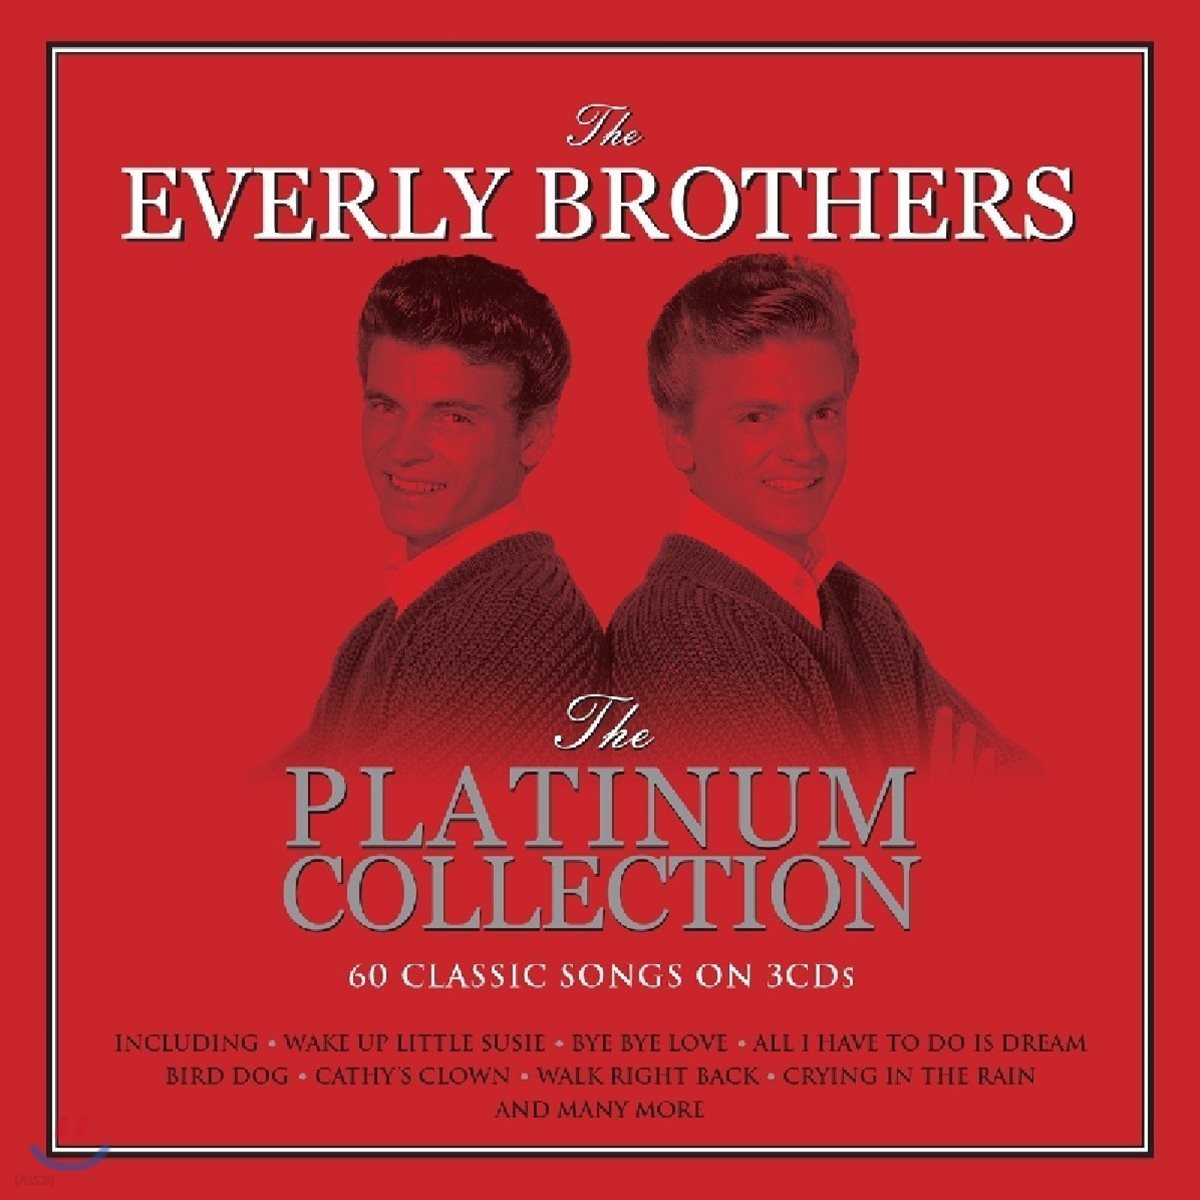 The Everly Brothers (에벌리 브라더스) - The Platinum Collection